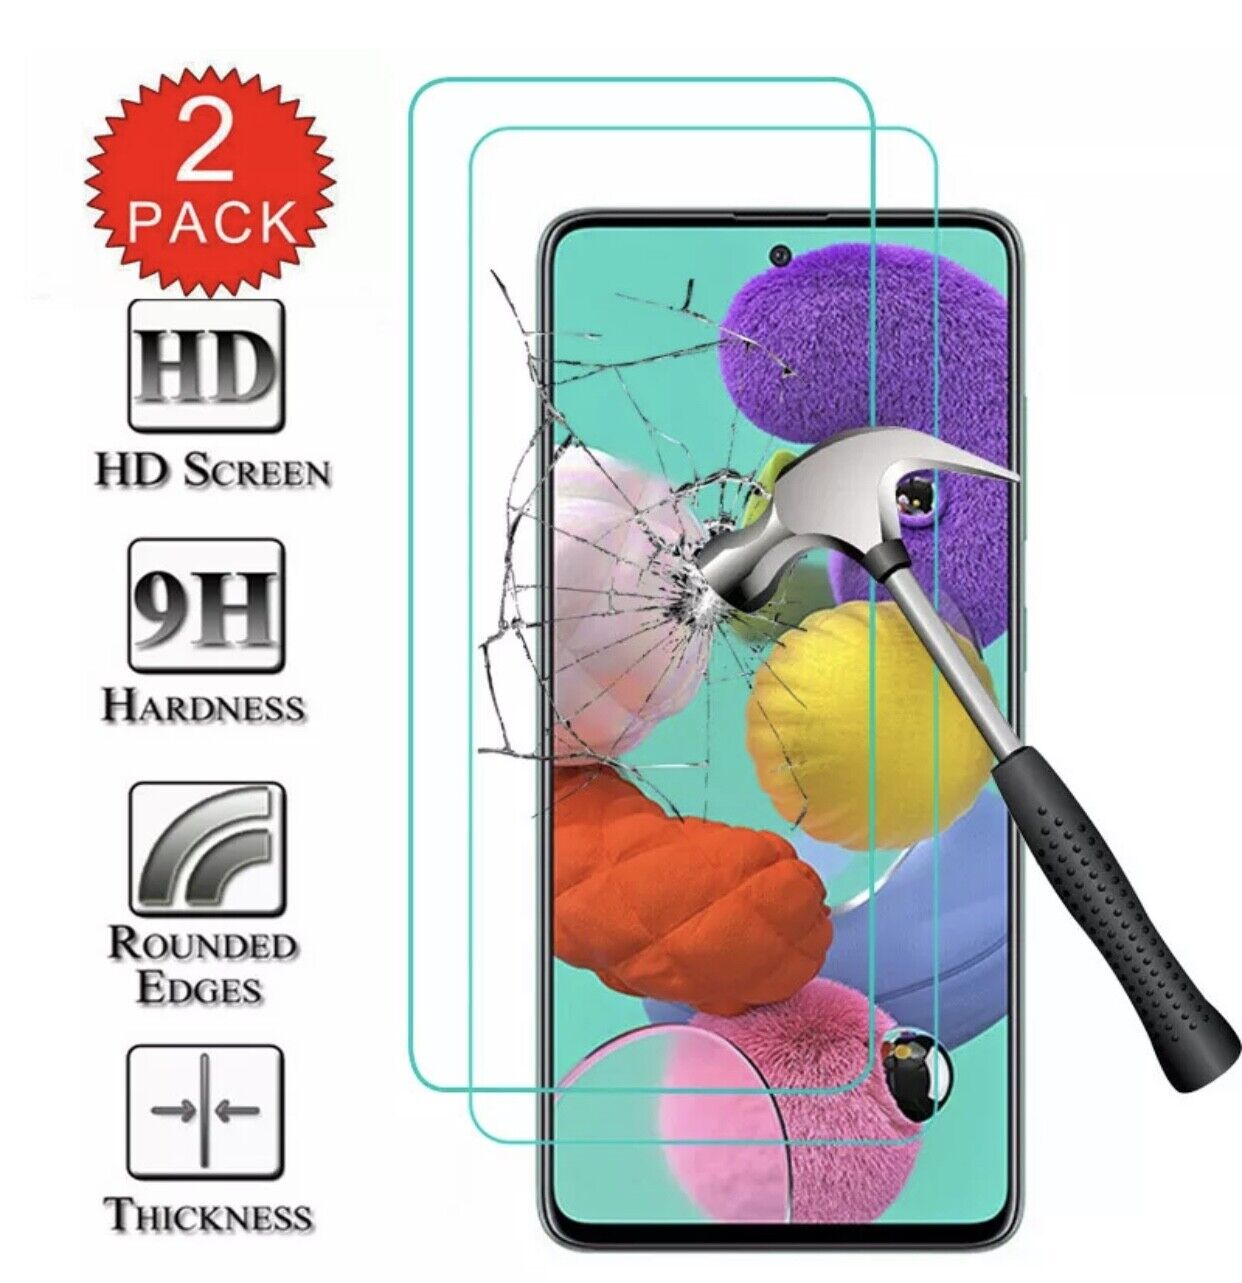 2-Pack Premium Tempered Glass Screen Protector For Samsung Galaxy A51 Unbranded